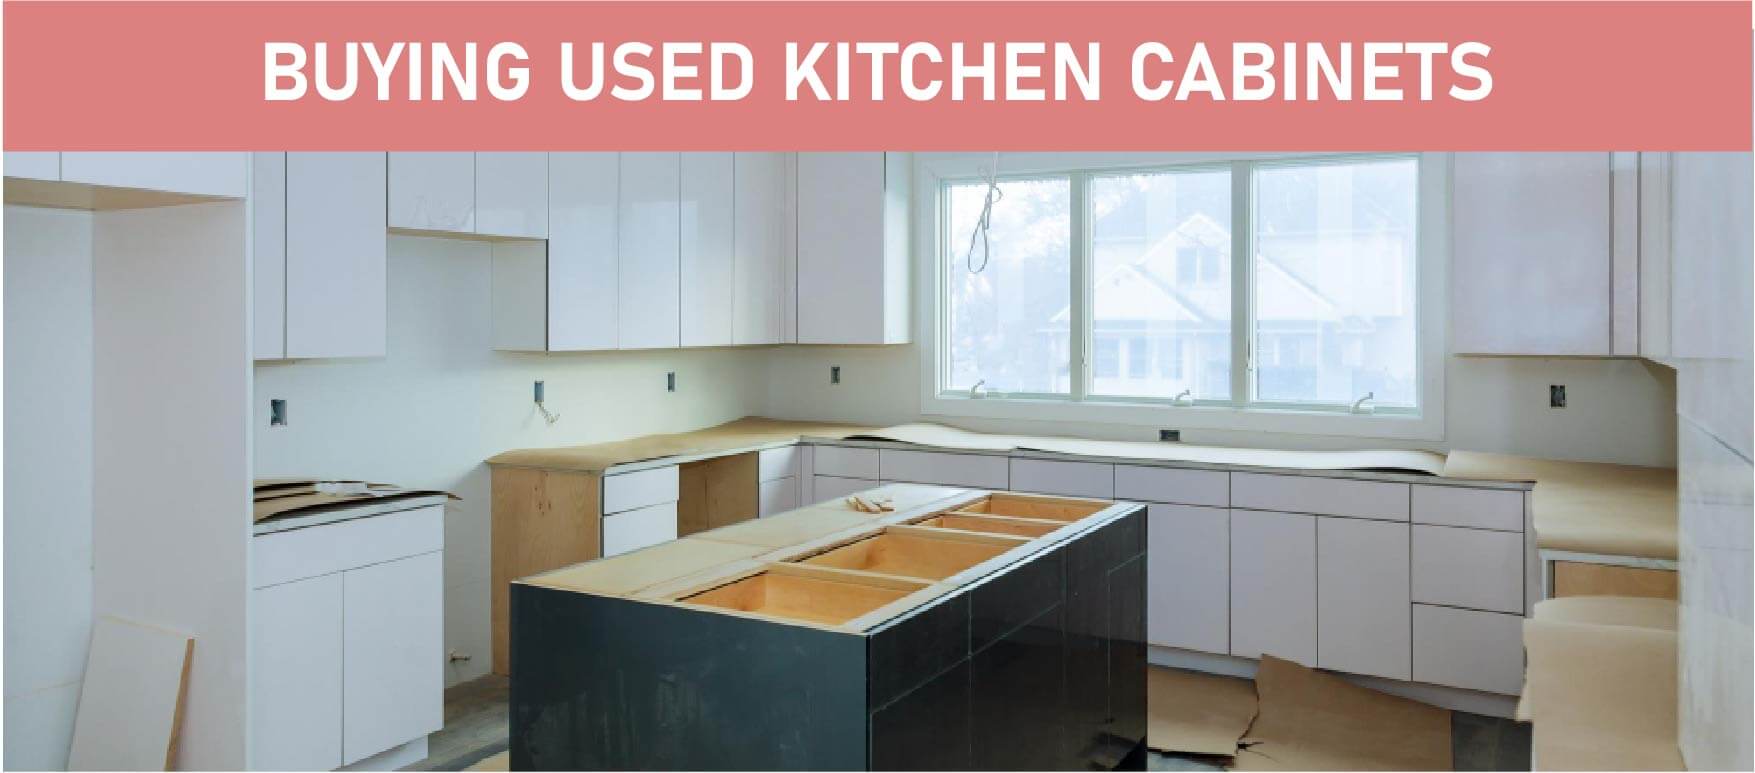 Kitchen Cabinets How Where To